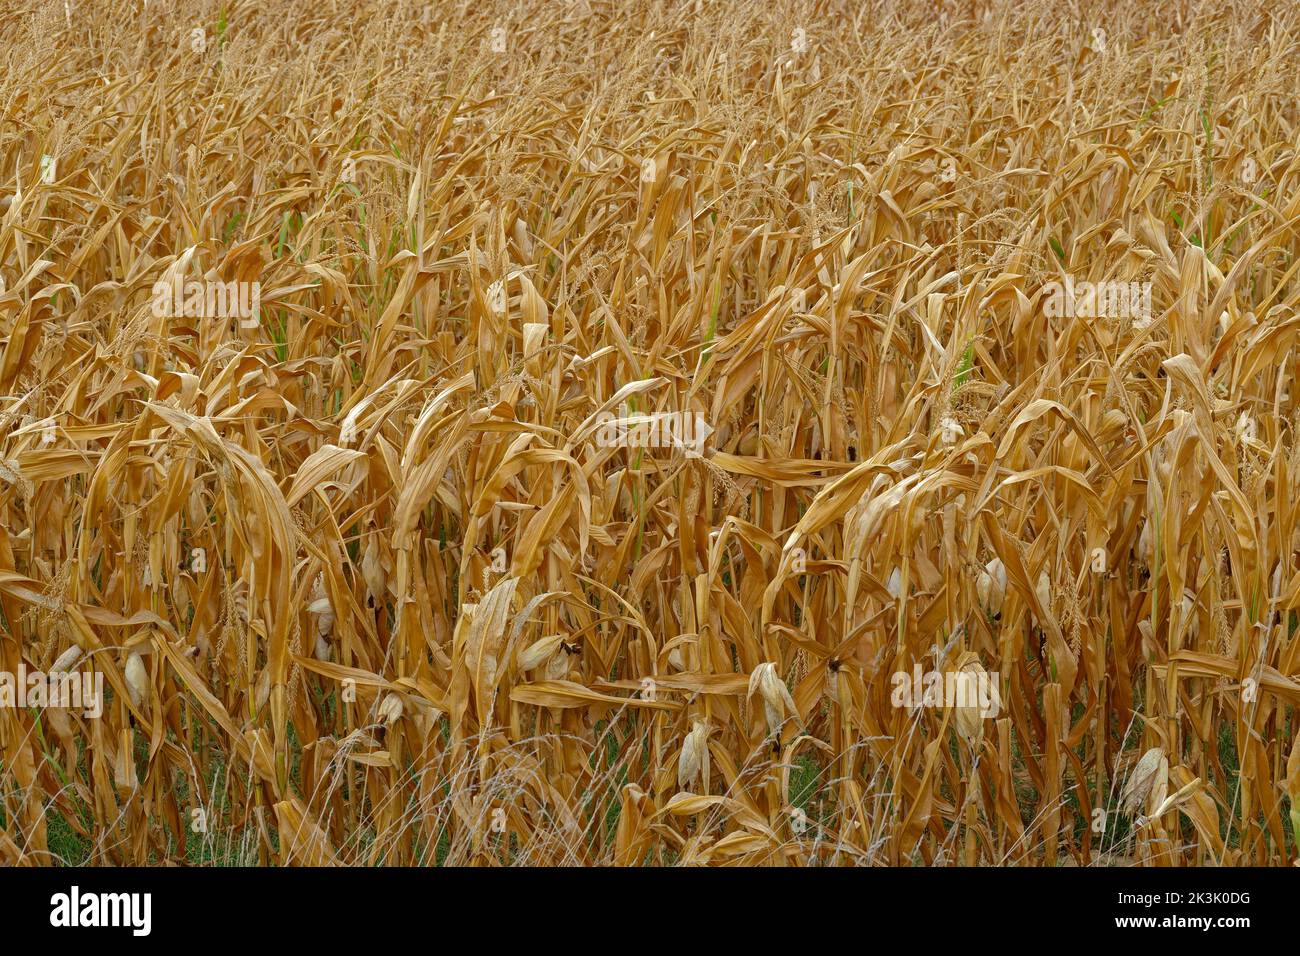 Corn Maize crop failure due to drought. Corn husks not formed. Stock Photo